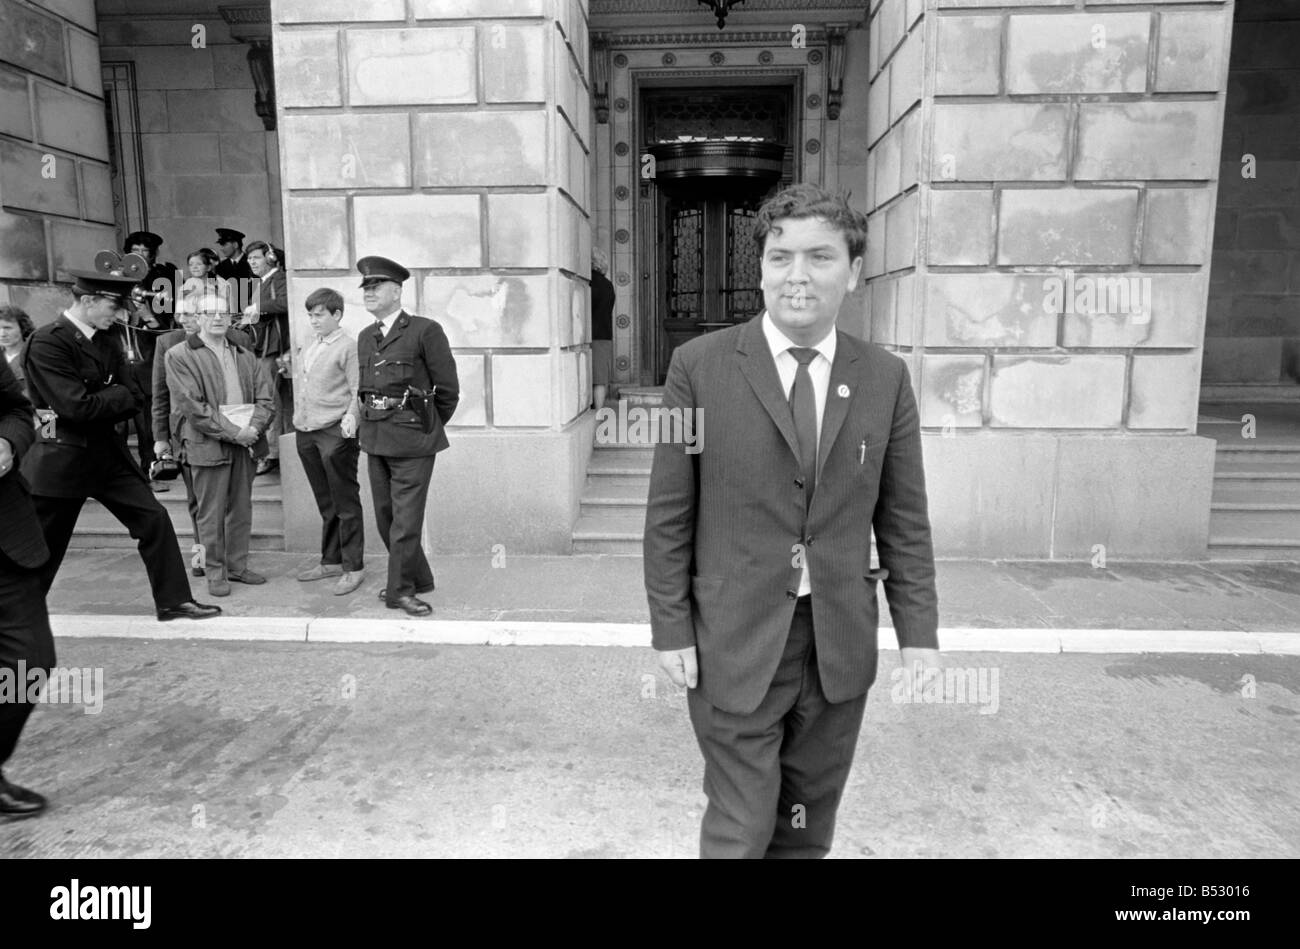 SDLP politician John Hume leaves the Stormont building in Belfast, Northern Ireland after participating in a debate. Aug. 1969 Stock Photo